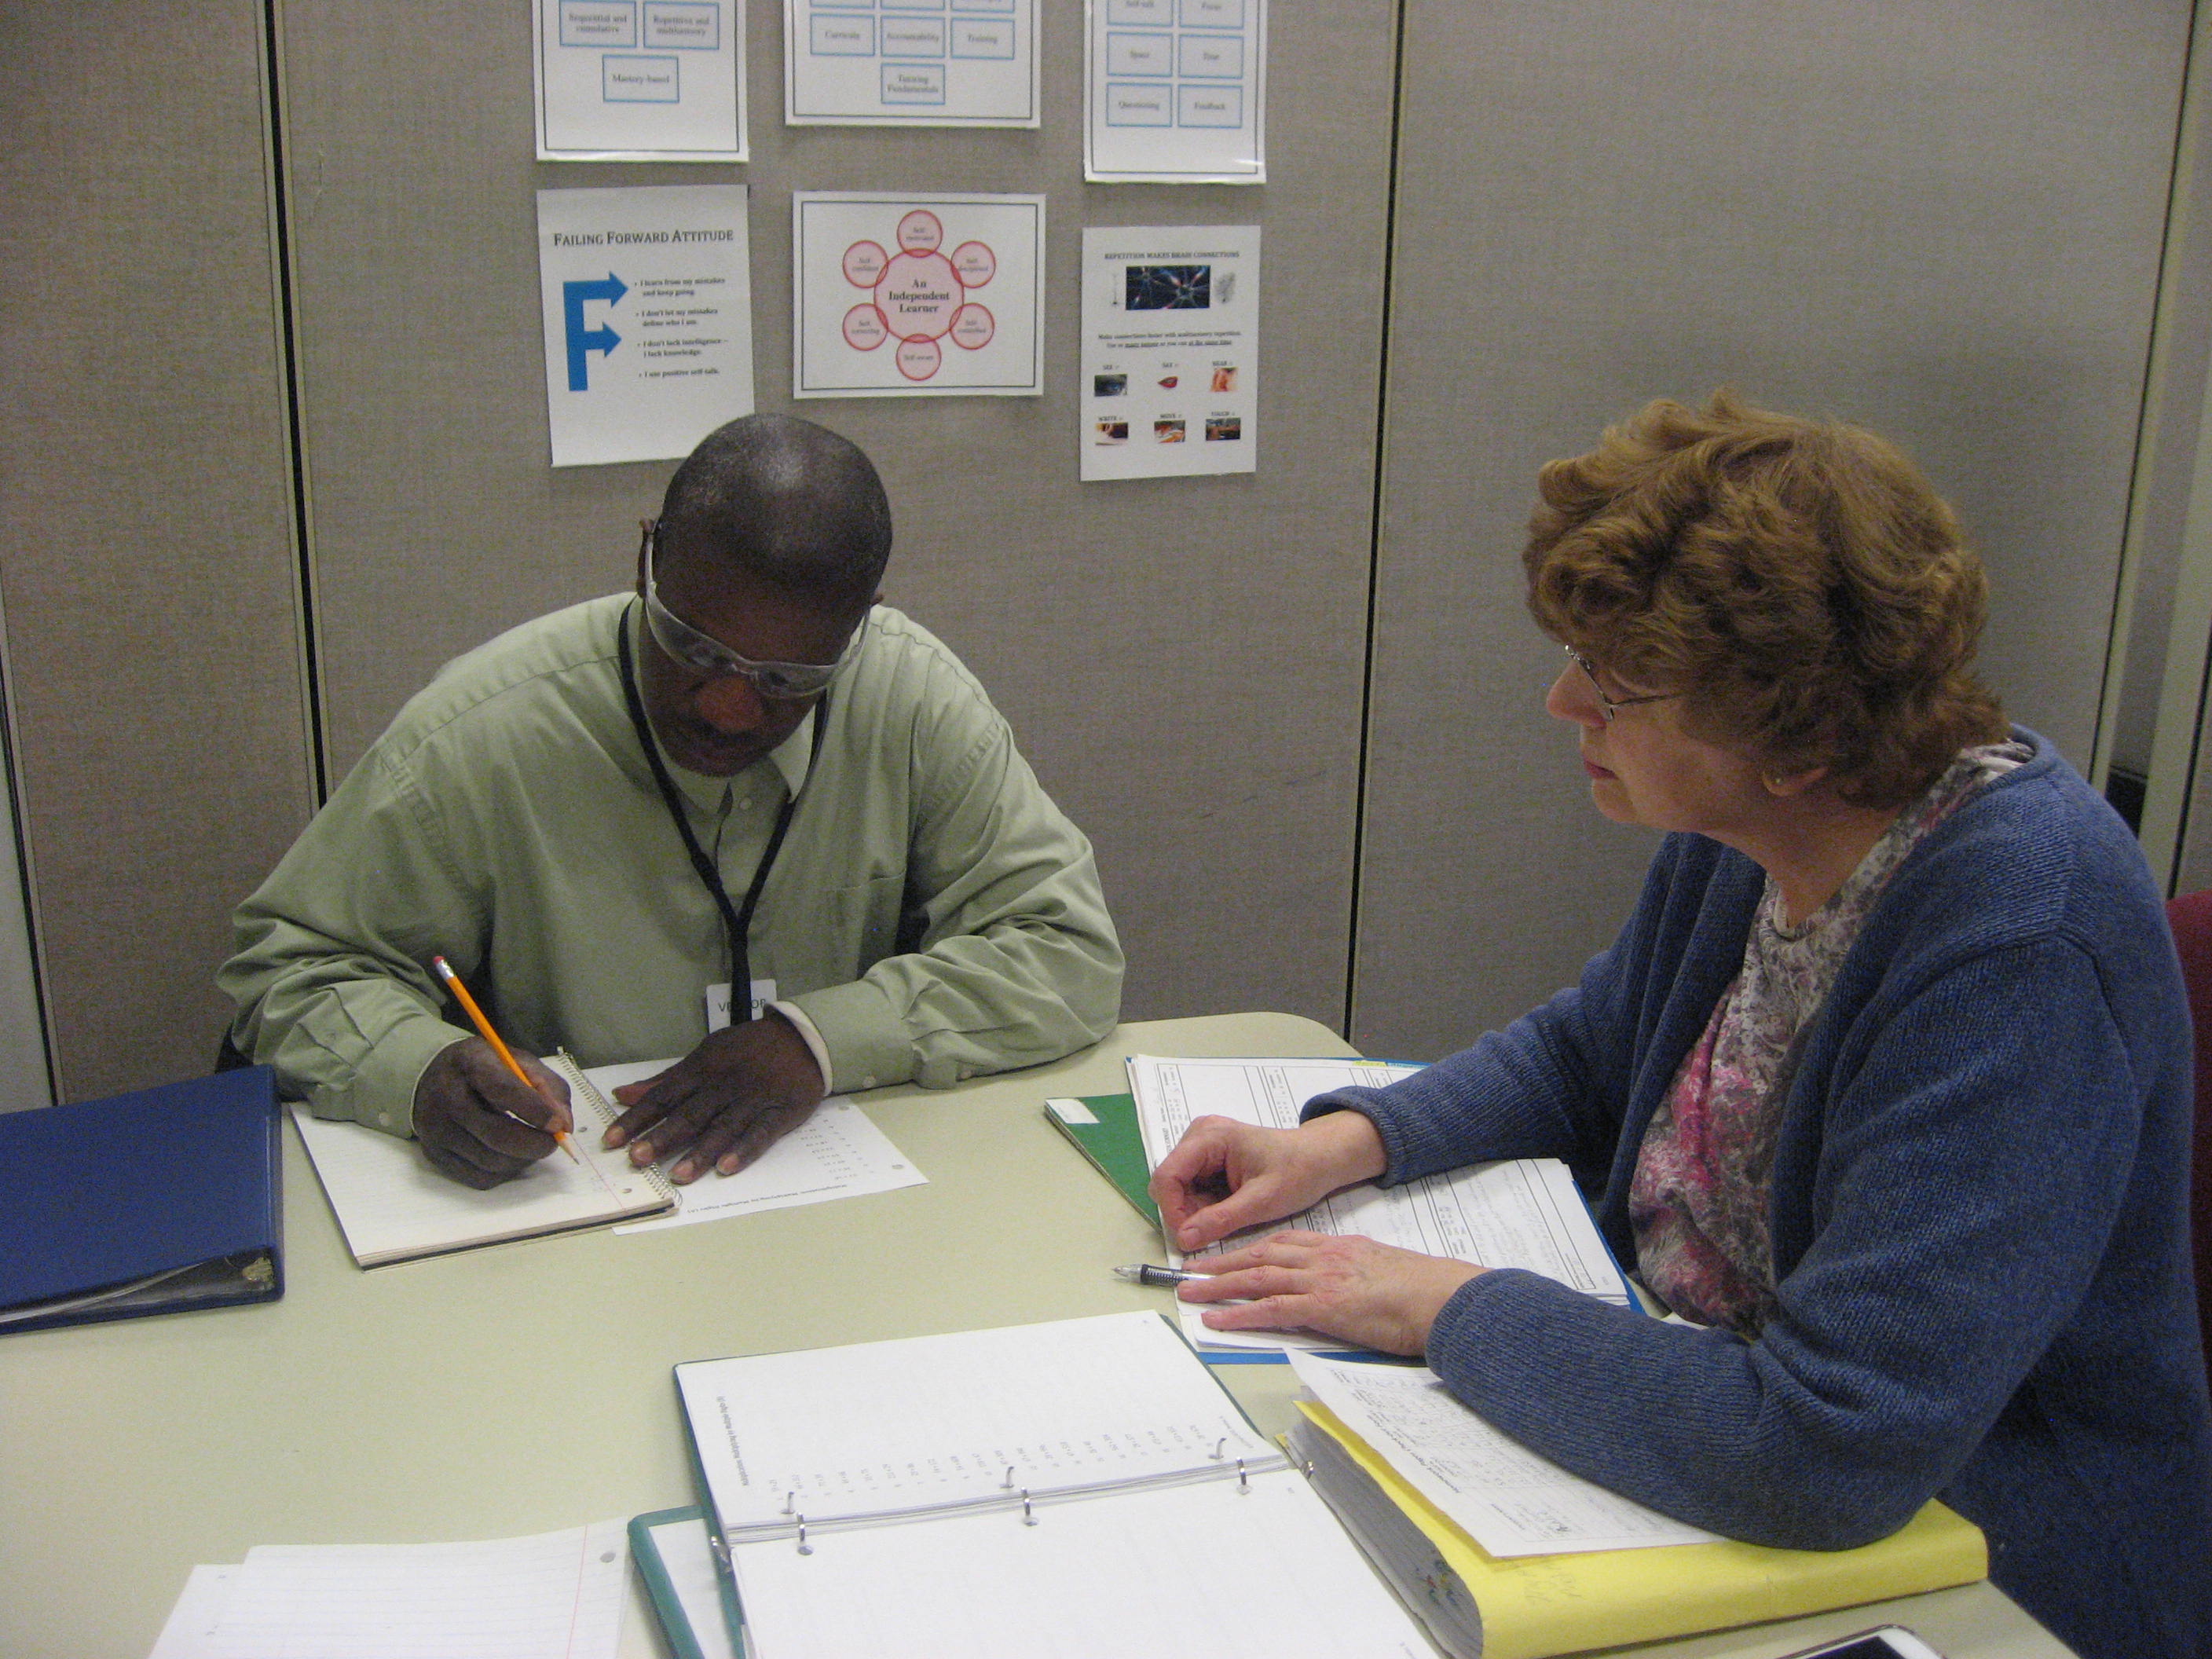 Regan and Cindy, project READ participants, work through a one-on-one math lesson.